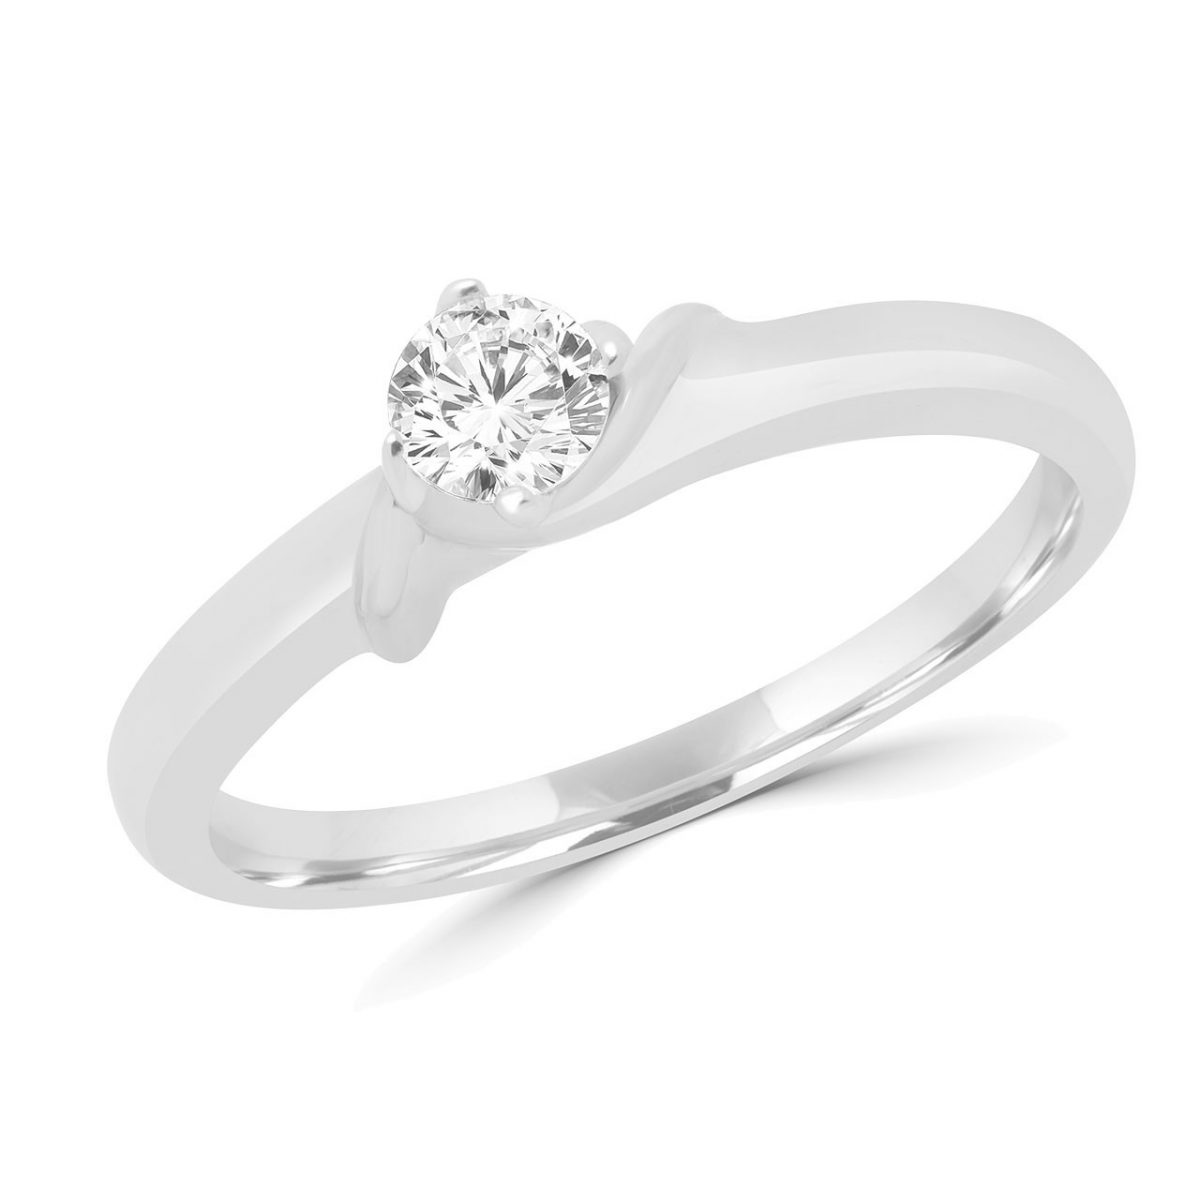 Shimmering round diamond solitaire promise ring in 14k white gold